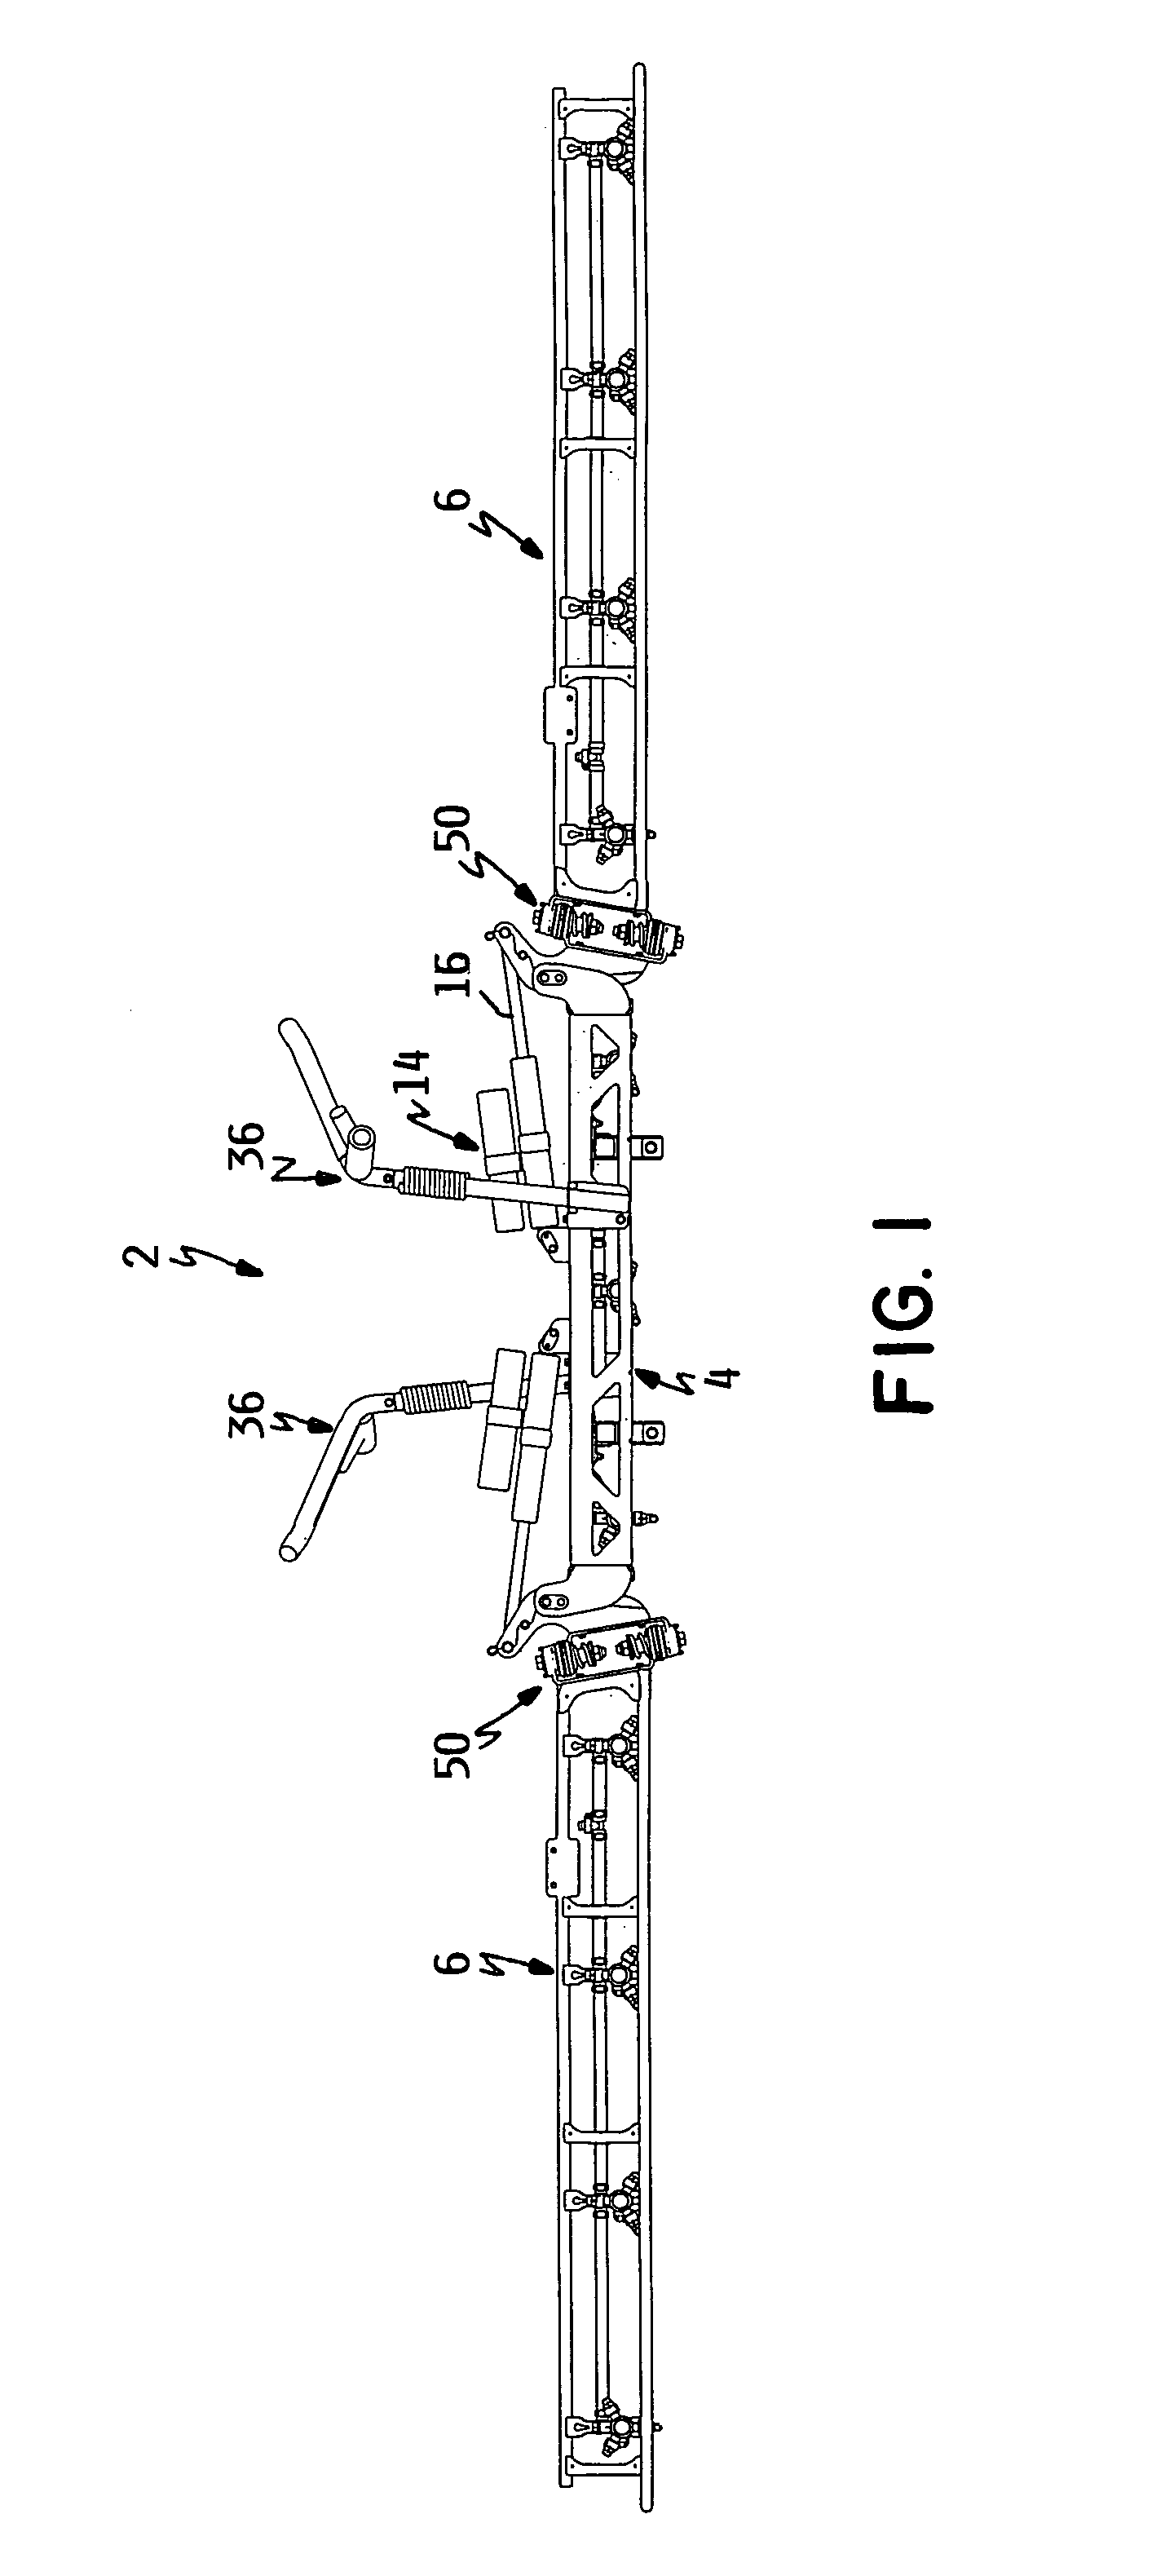 Sprayer with pivotal wing booms having forward and reverse breakaway and folded X-shaped transport position